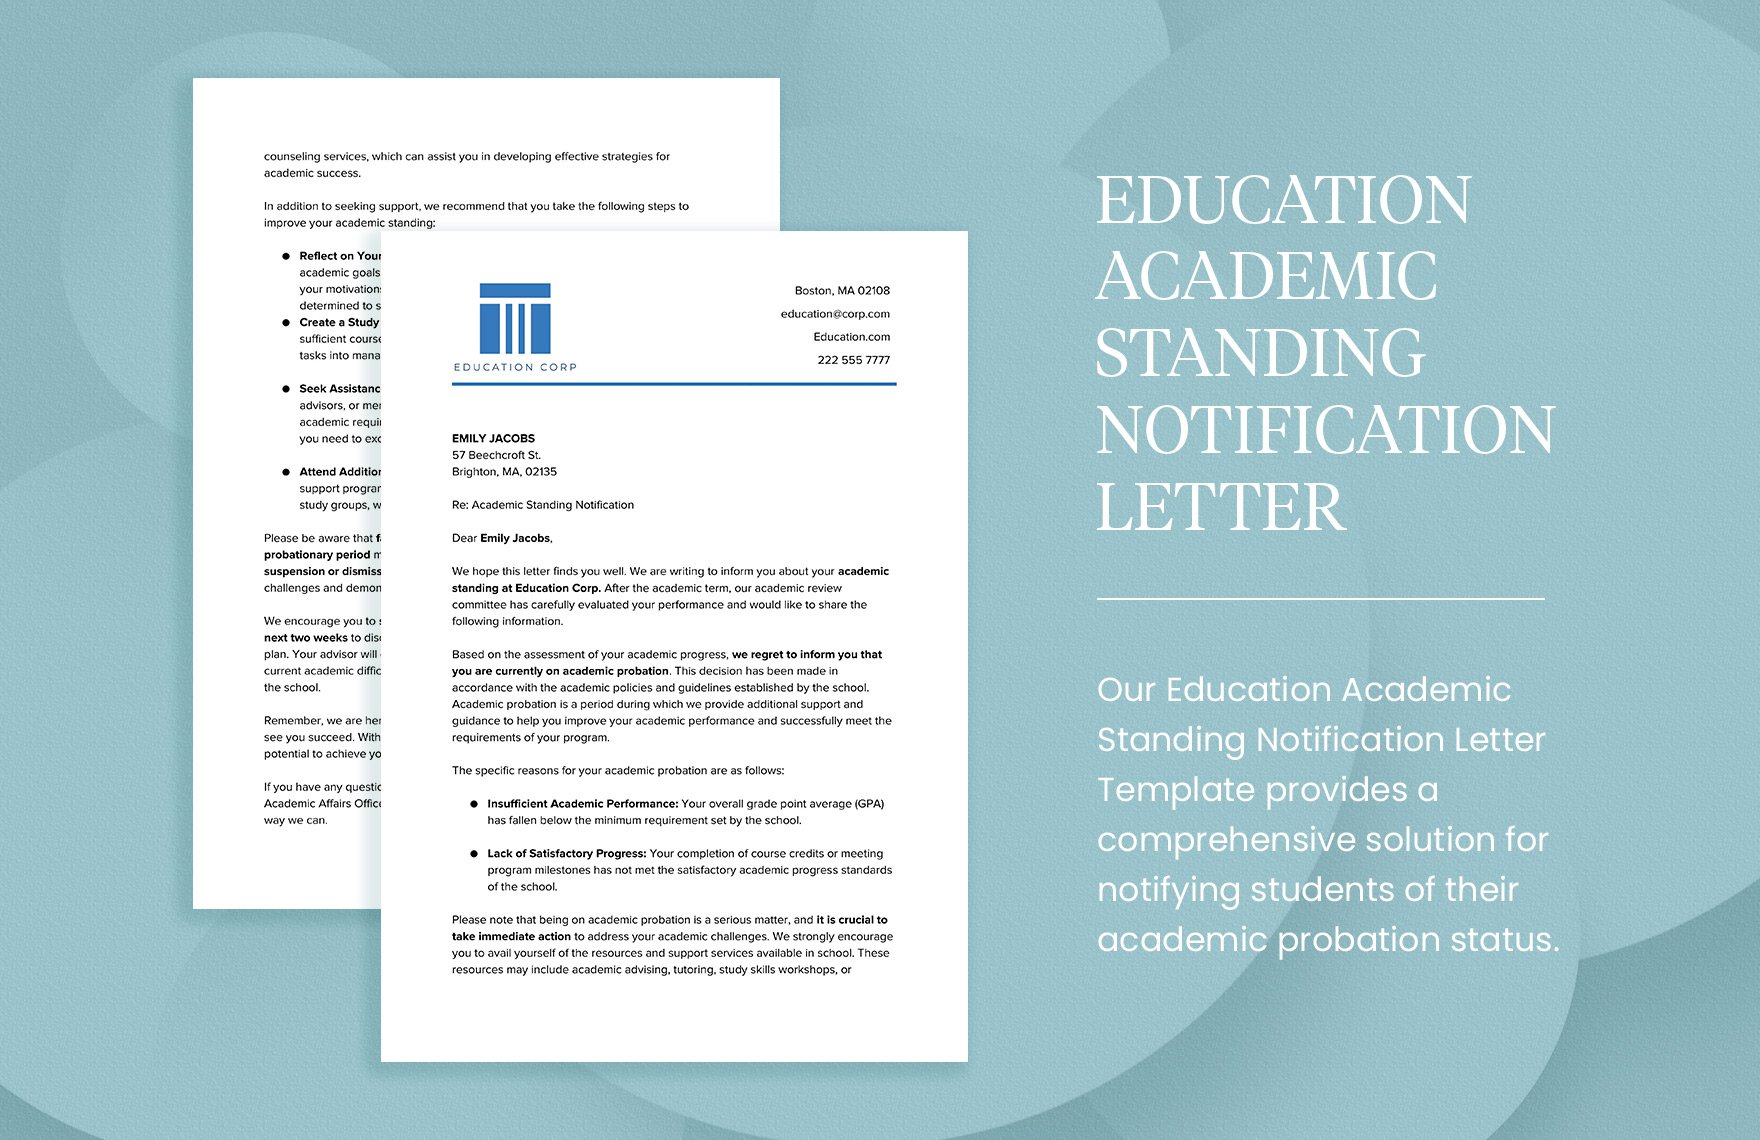 Education Academic Standing Notification Letter